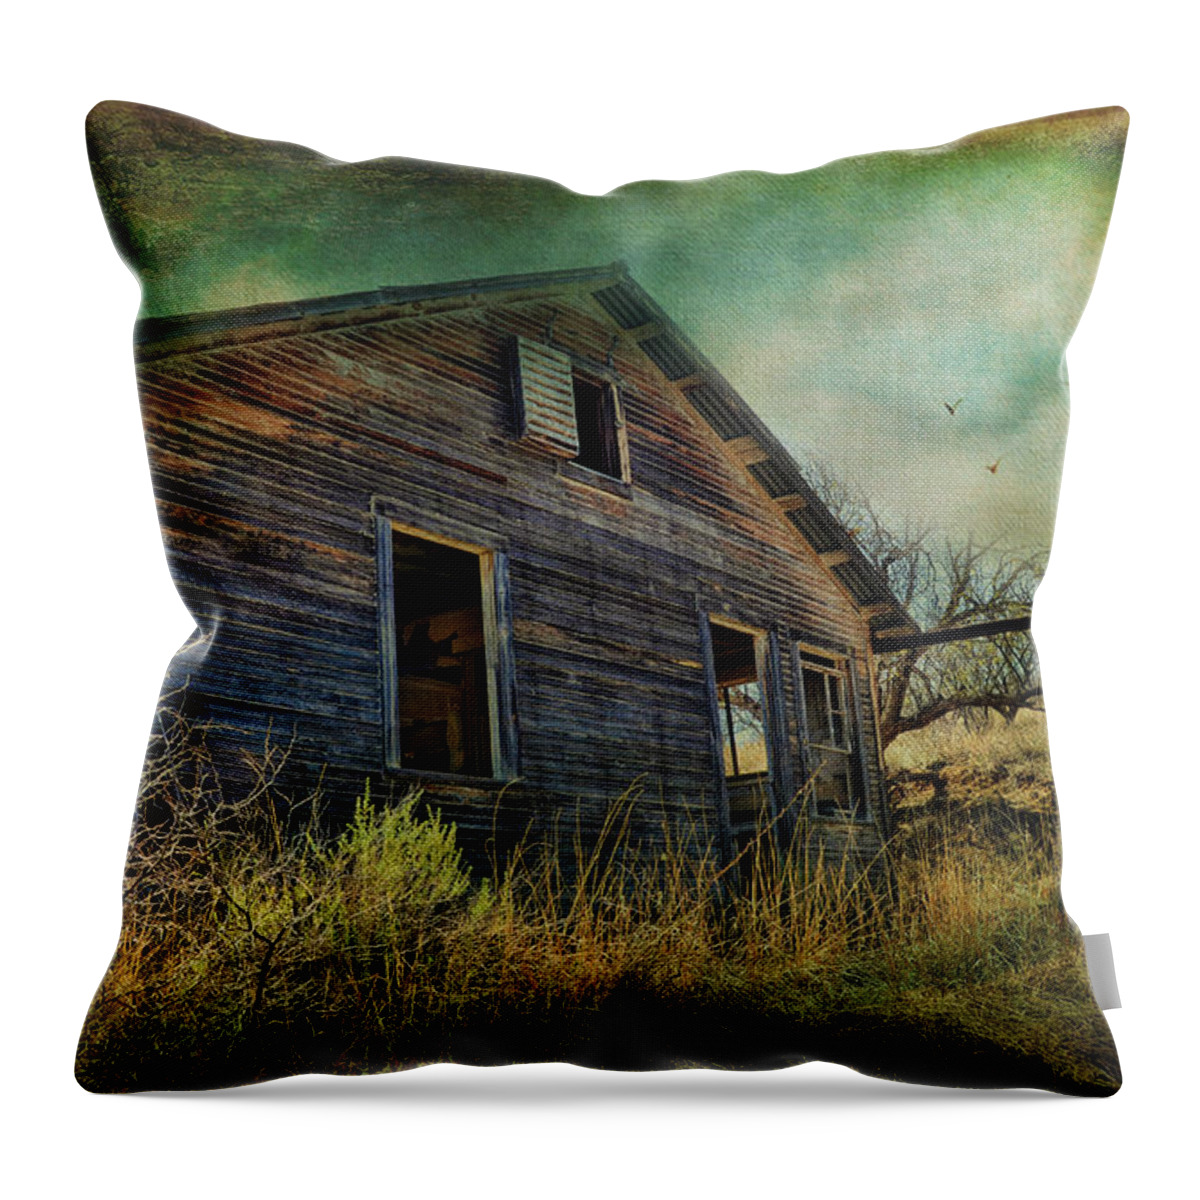 Deserted Throw Pillow featuring the photograph Deserted by Barbara Manis